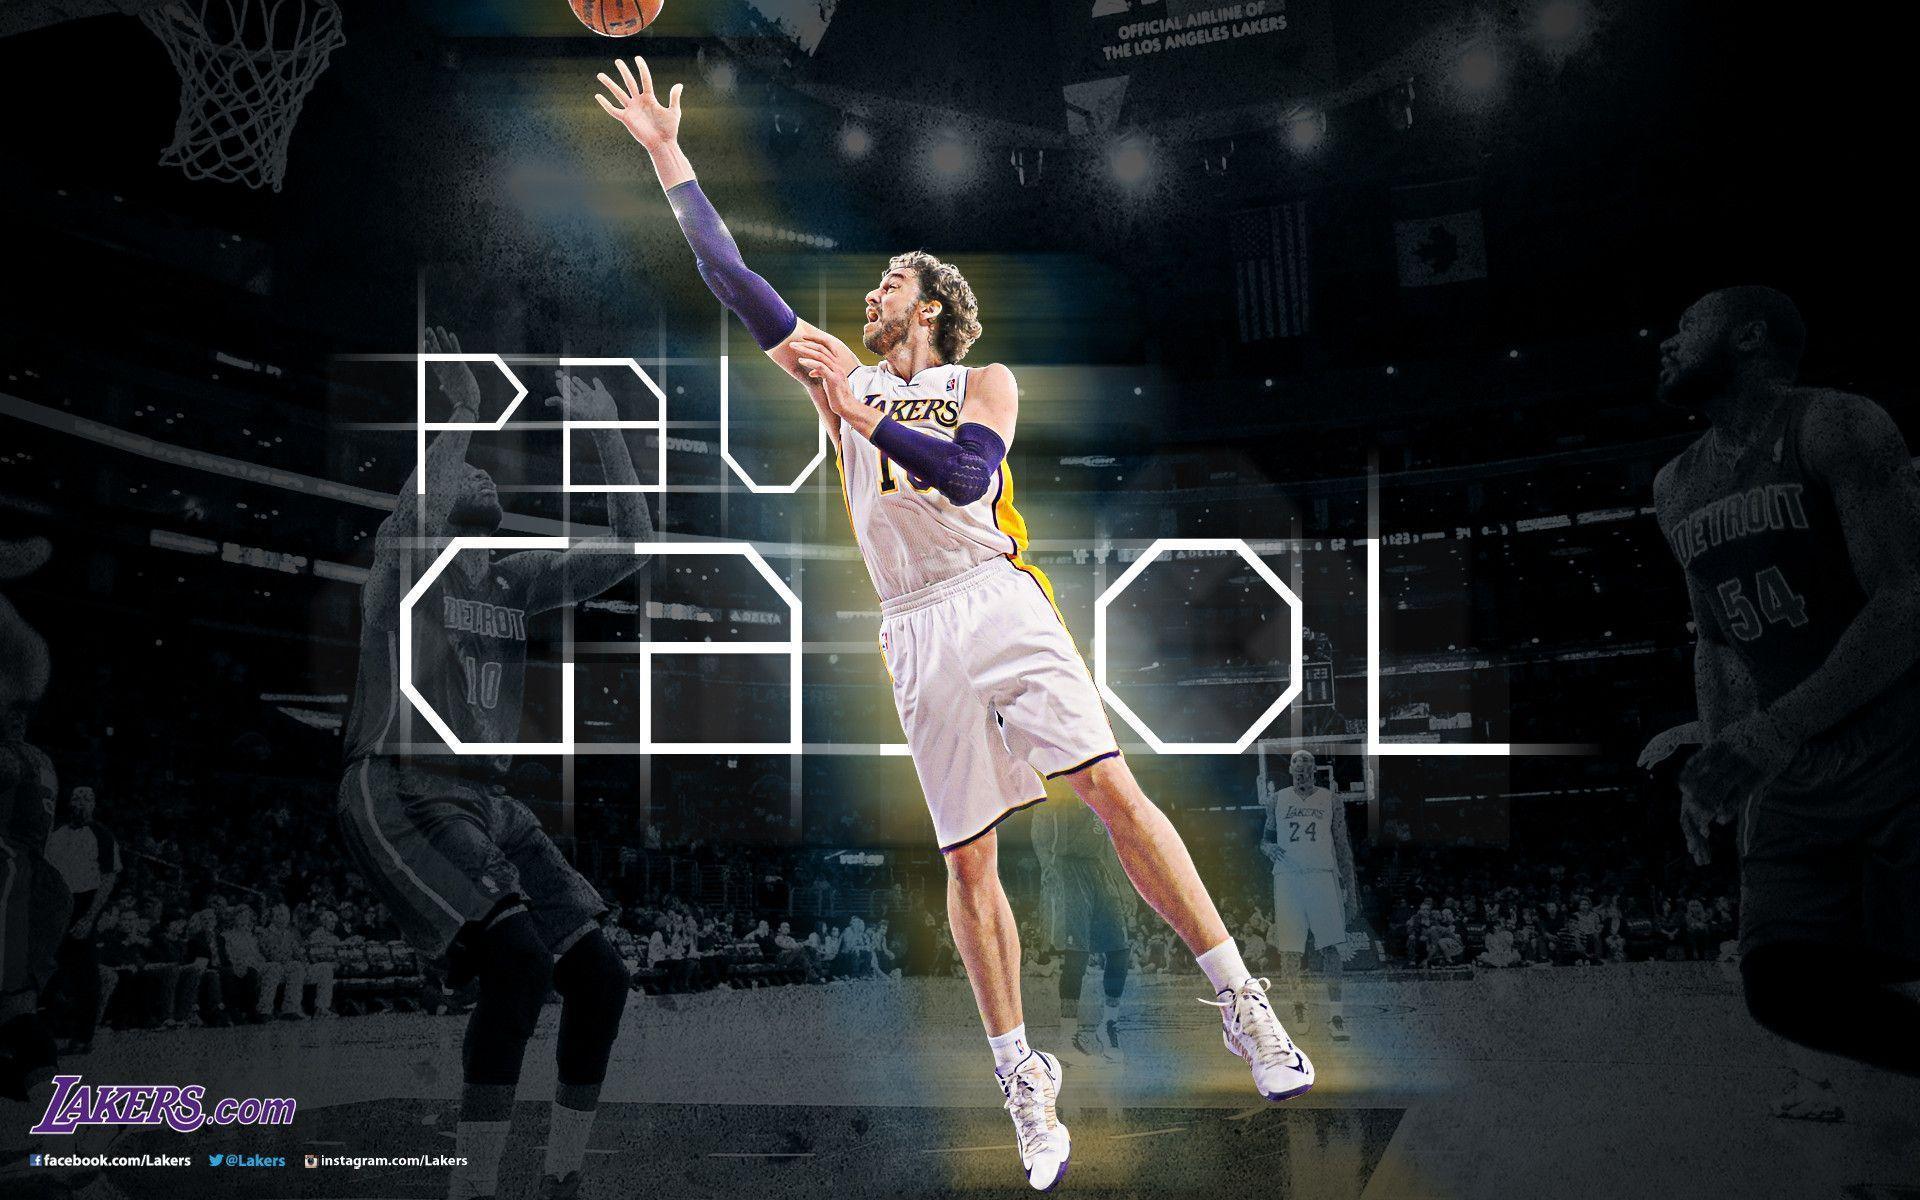 2013 14 Profile: Pau Gasol. THE OFFICIAL SITE OF THE LOS ANGELES